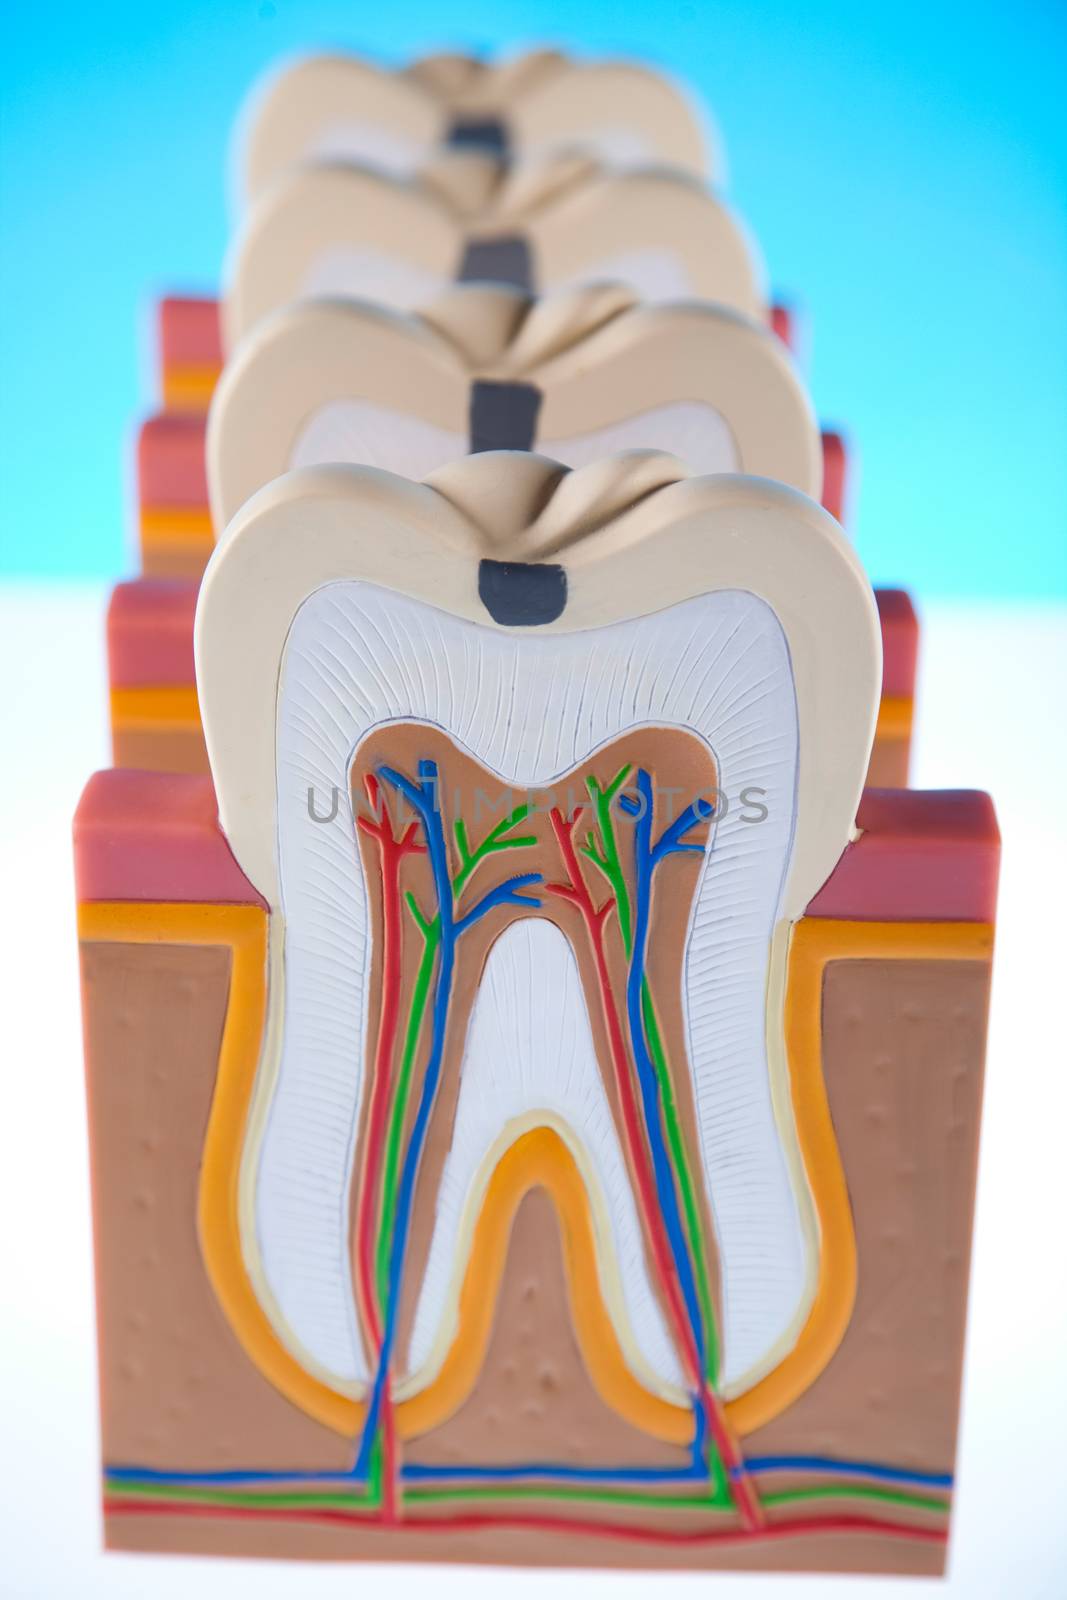 Tooth, bright colorful tone concept by JanPietruszka